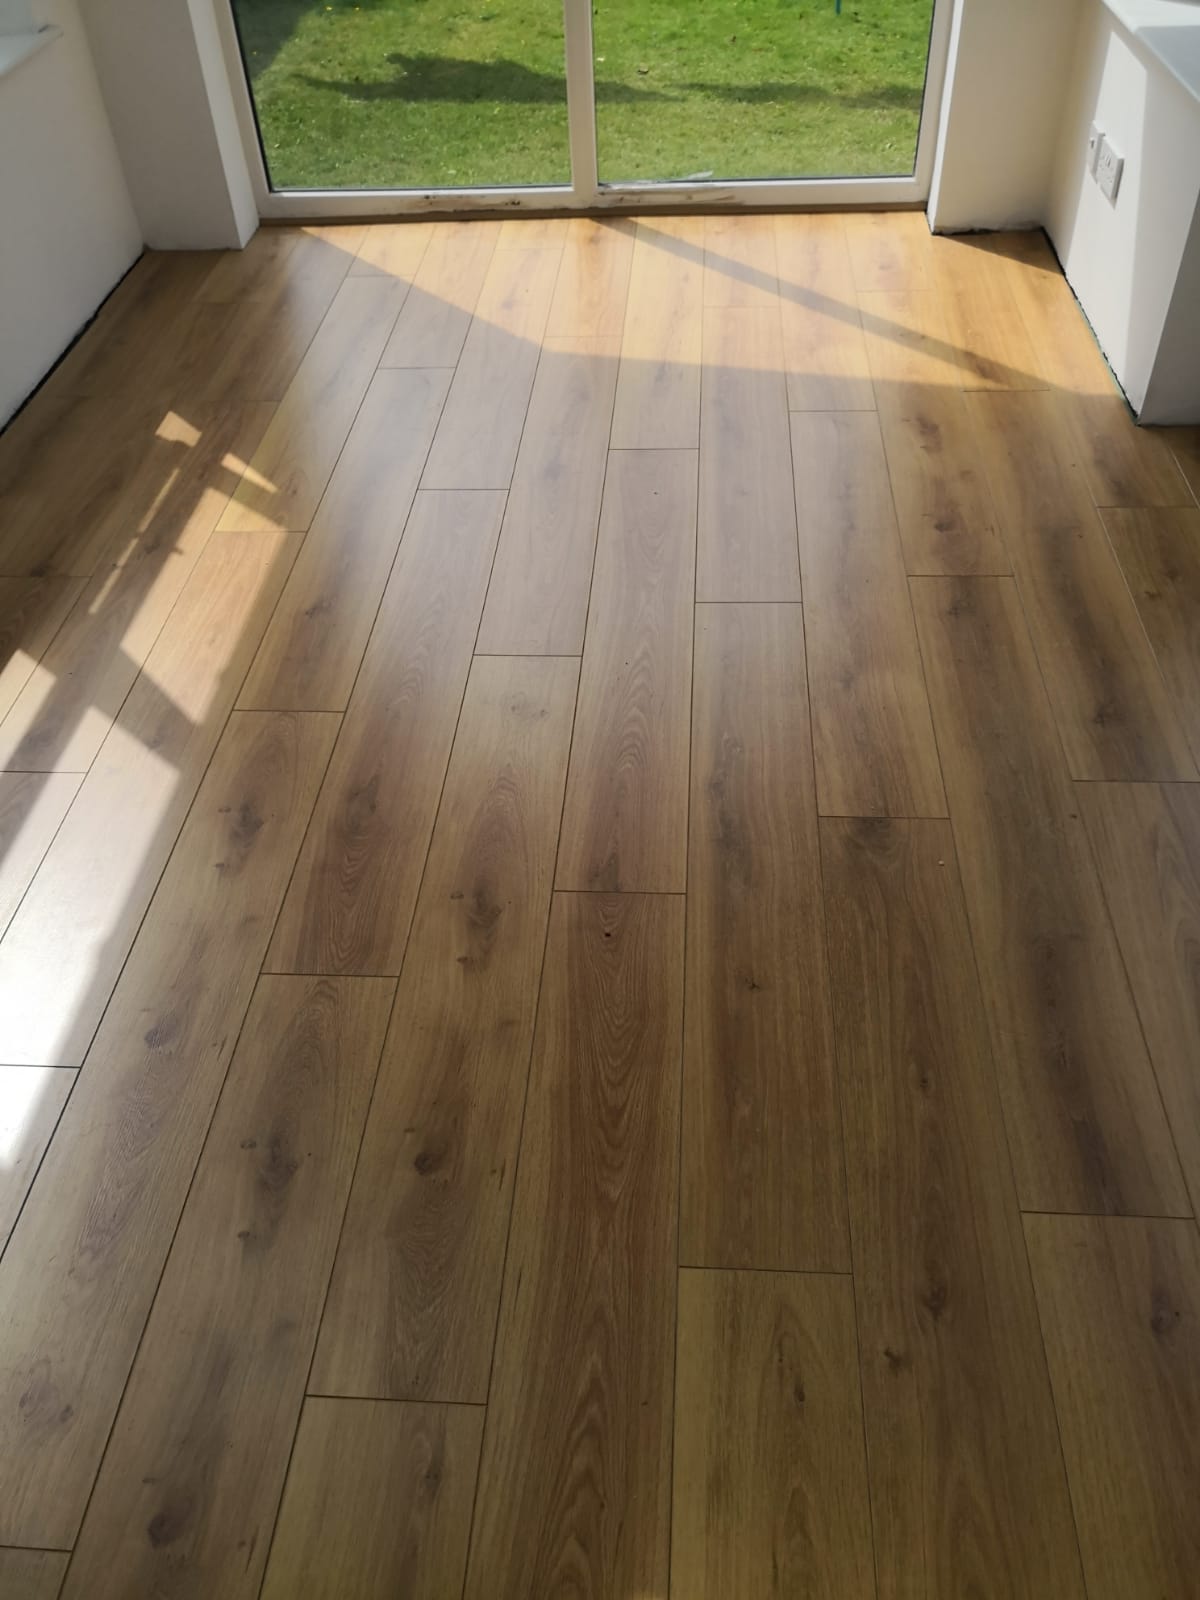 Lifestyle Floors Chelsea Traditional Oak Laminate Flooring The Carpet Shop at the Mews